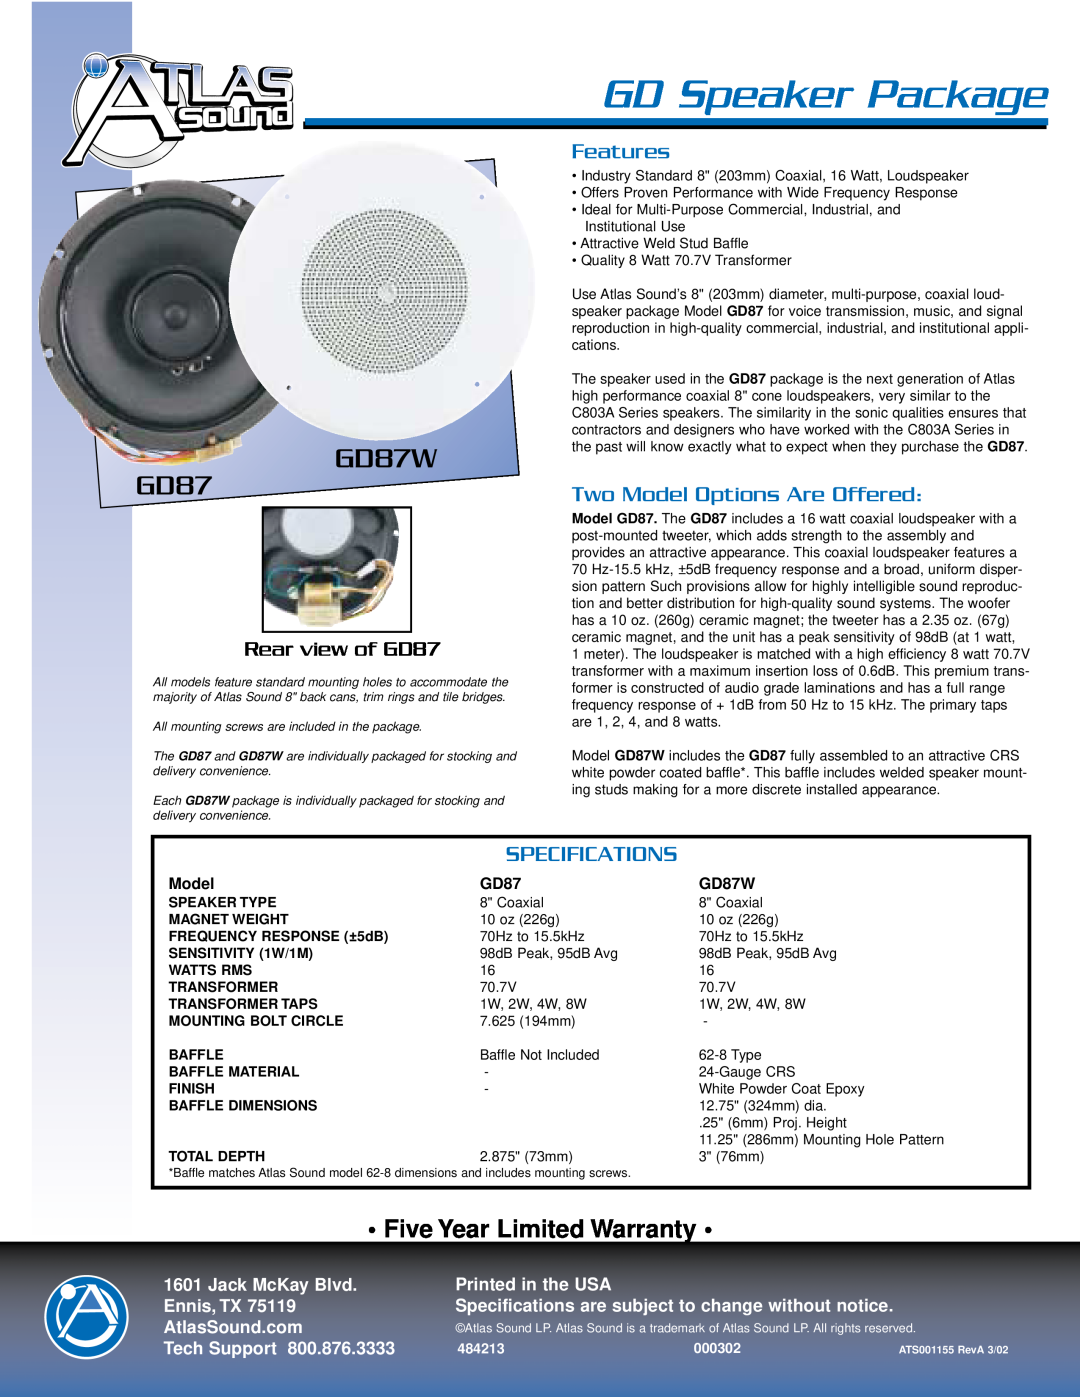 Atlas Sound SD72WV GD Speaker Package, GD87W, Two Model Options Are Offered, Rear view of GD87, Five Year Limited Warranty 